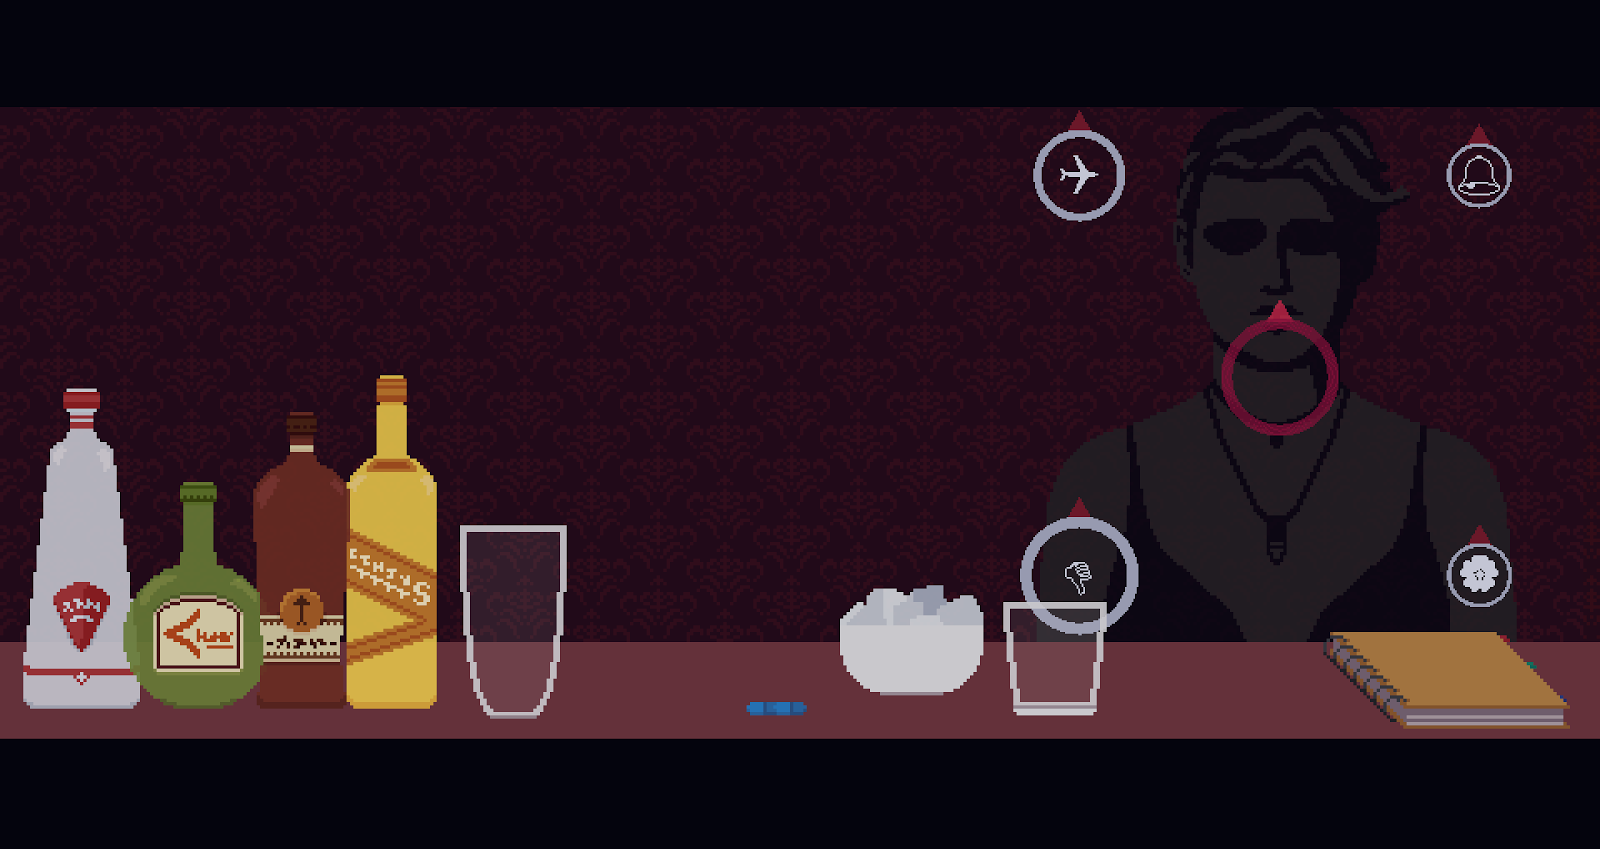 A Cyberpunk Game Where You Manipulate People With Alcohol